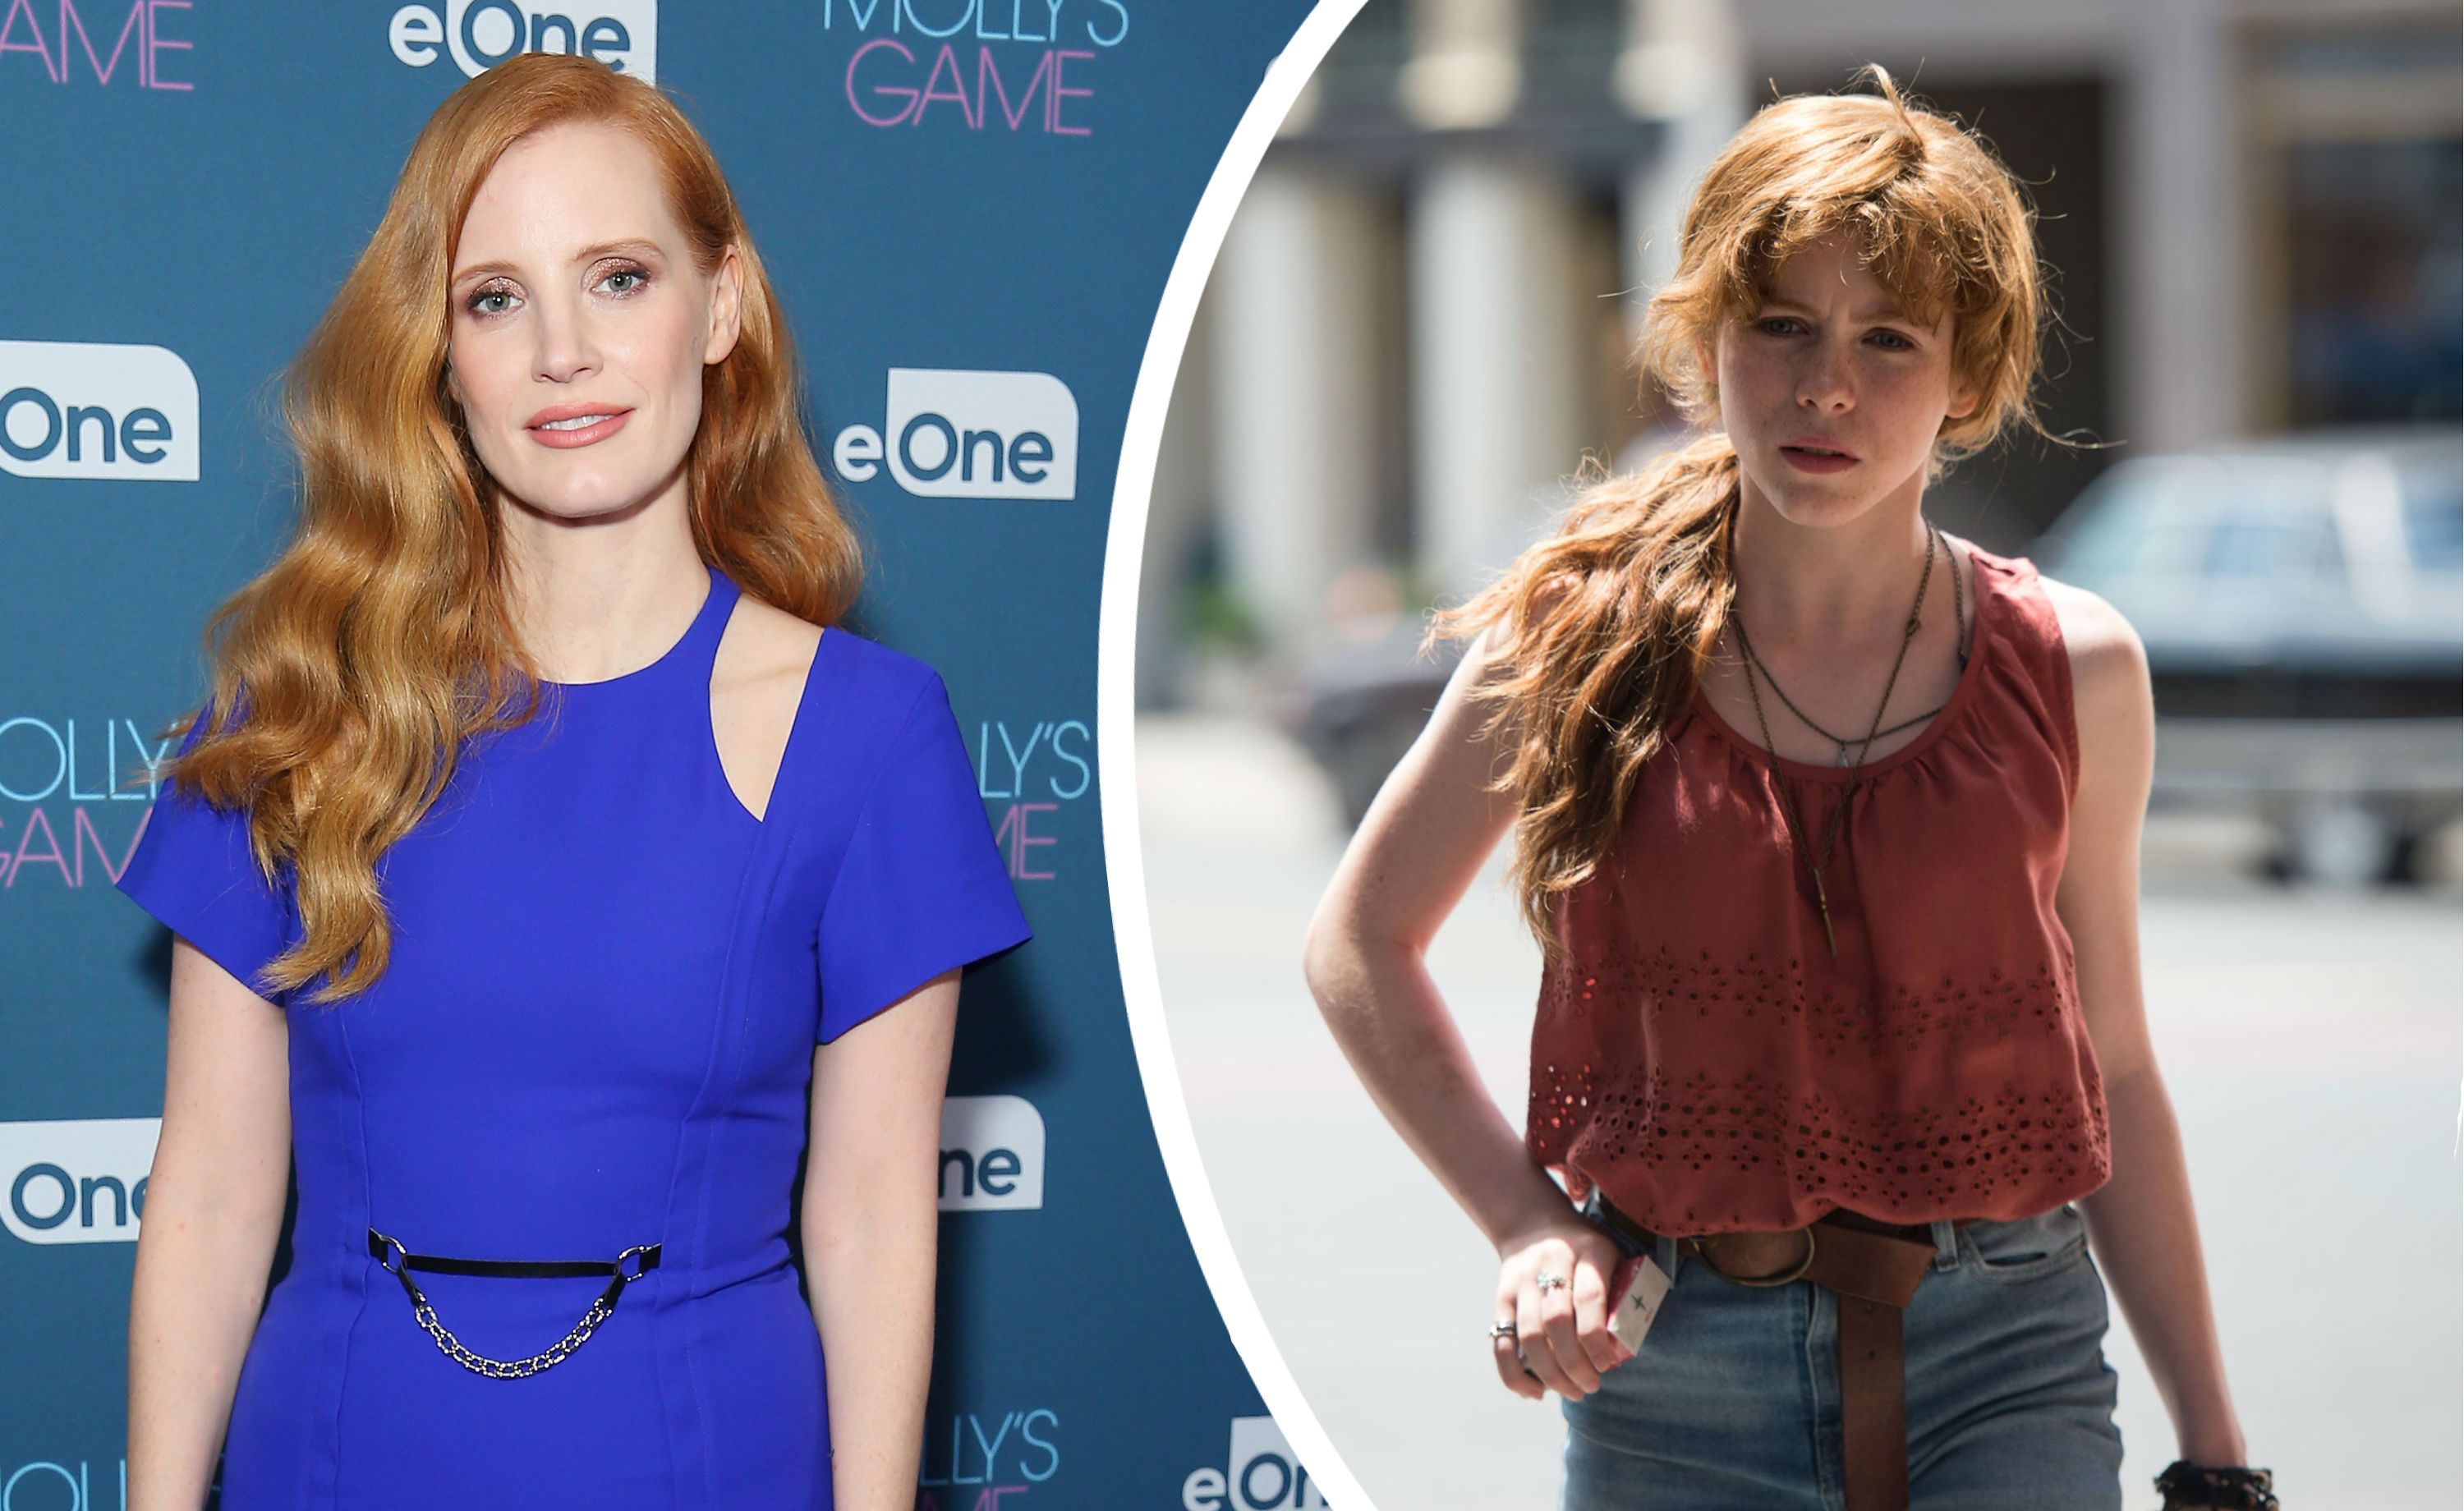 Jessica Chastain Shows Off Her Beverly Marsh Look For 'IT: Chapter 2